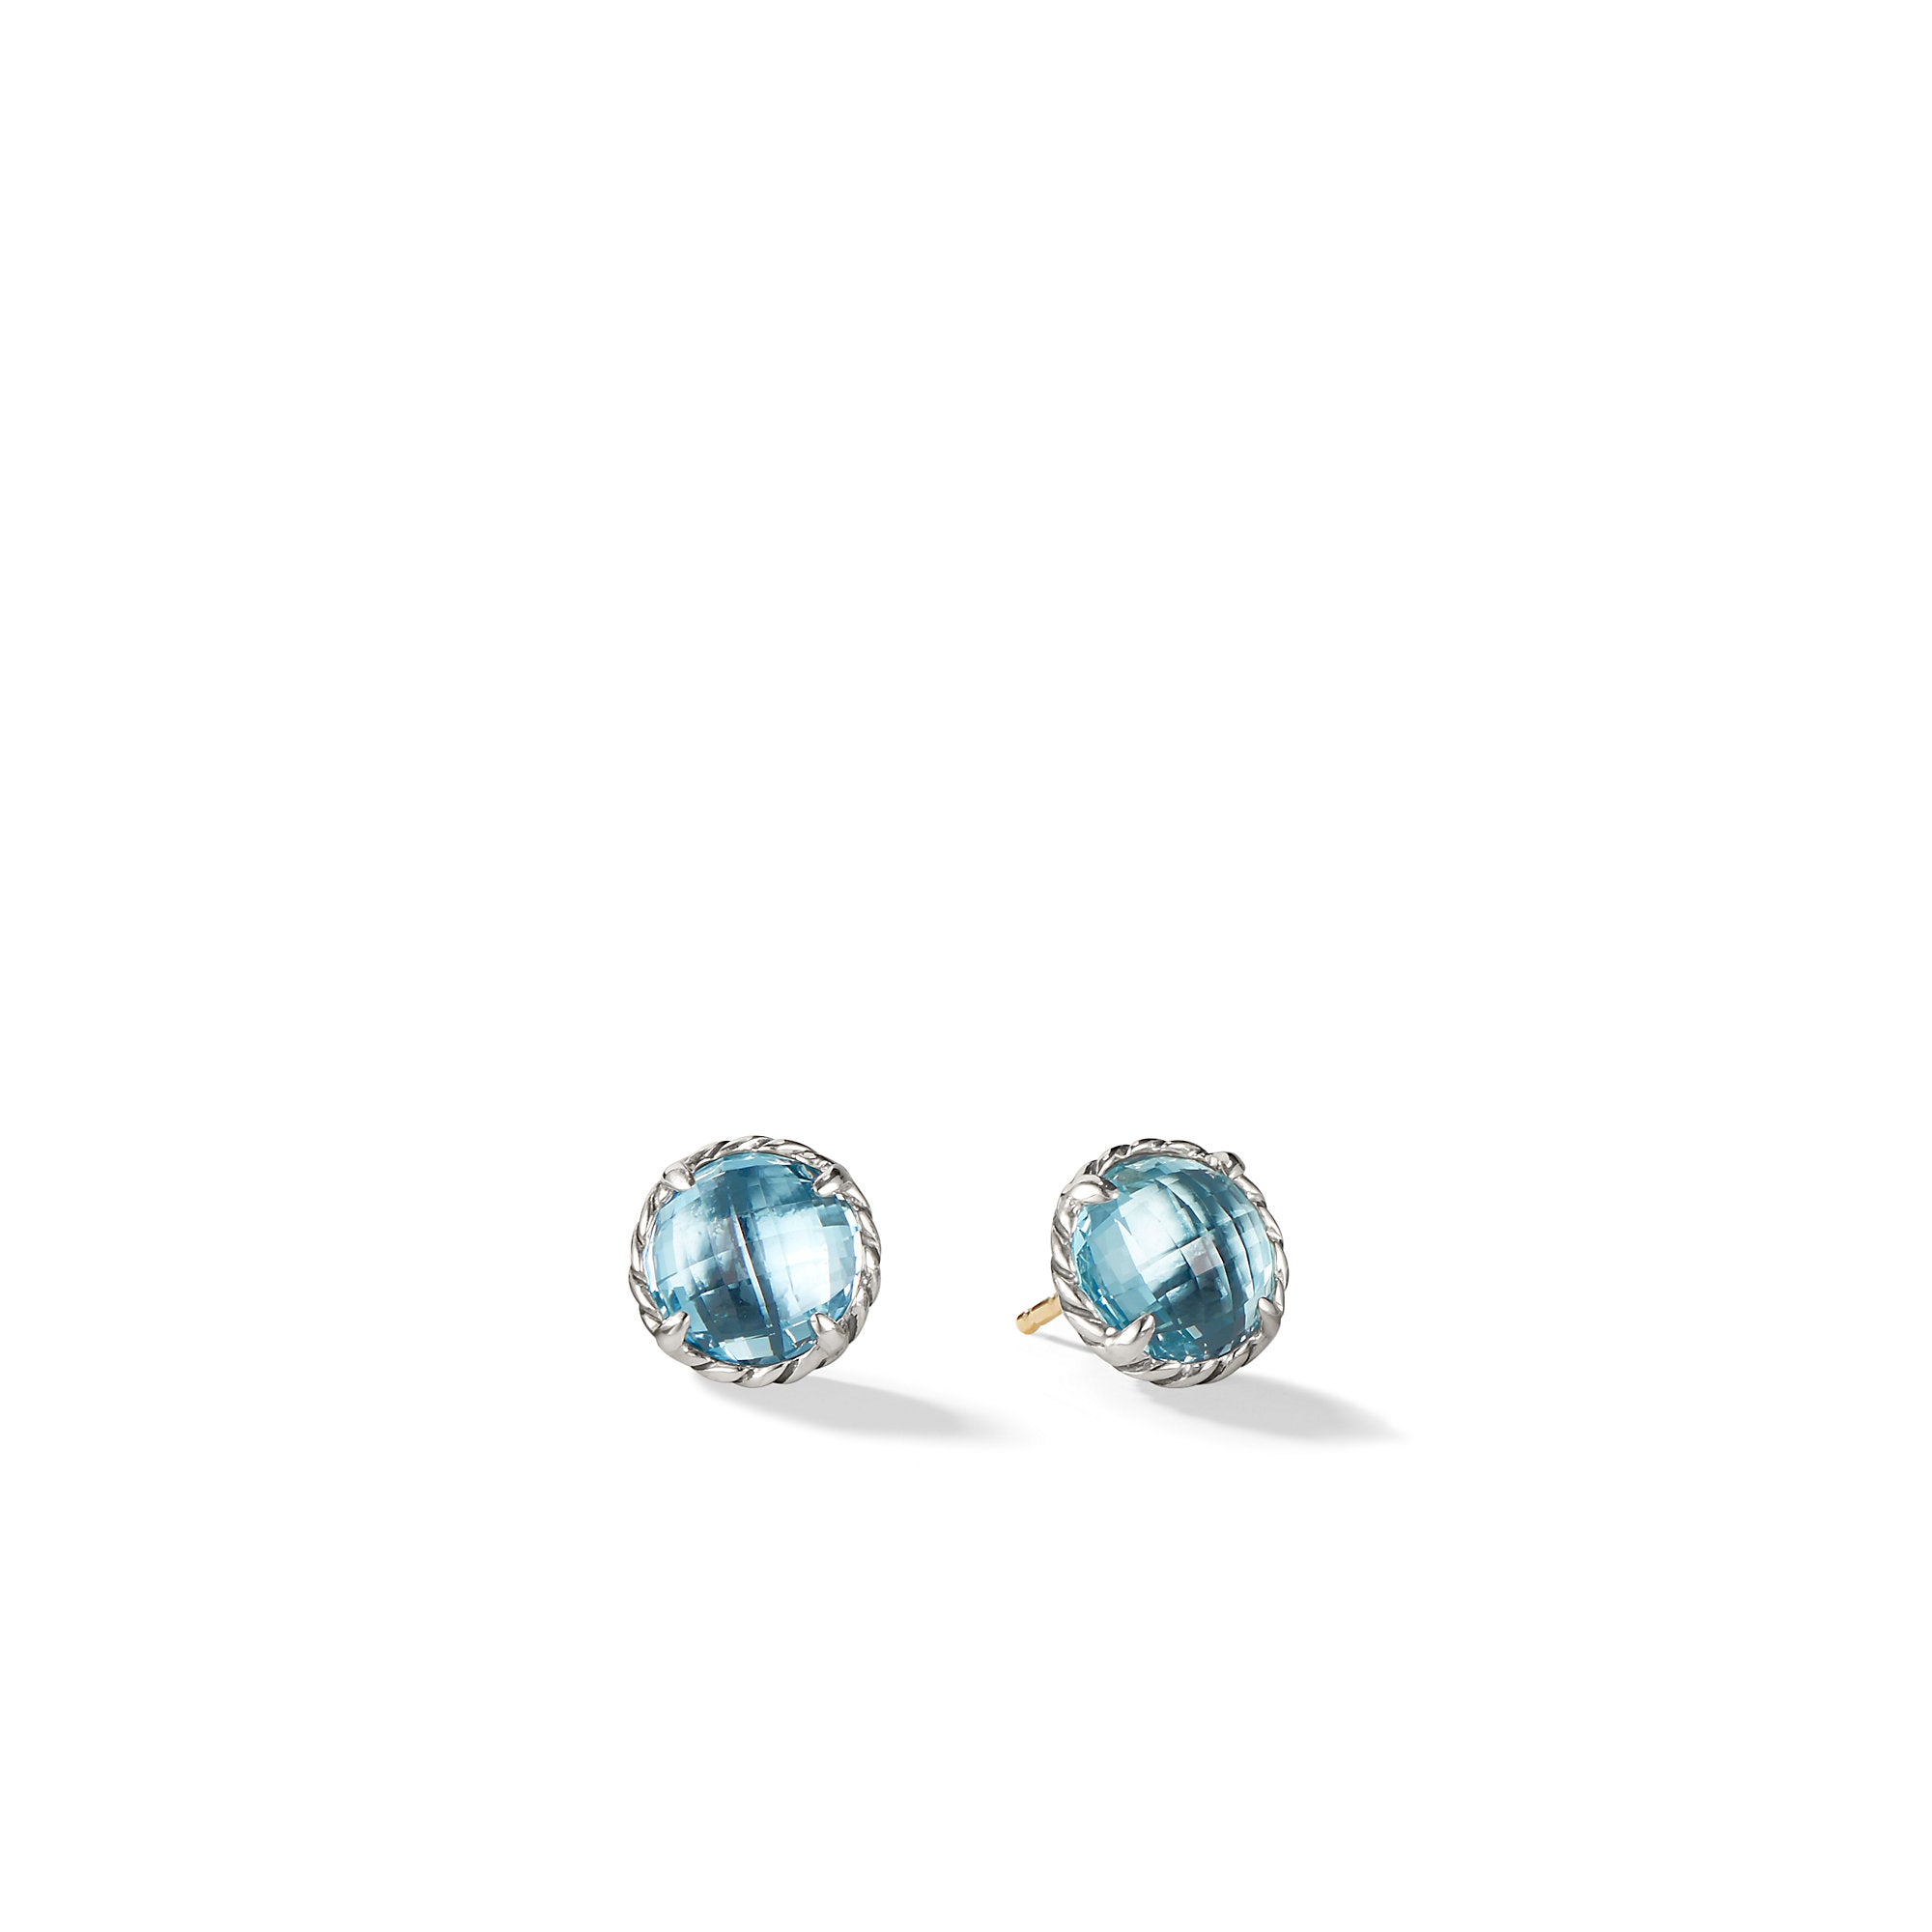 Chatelaine Earrings With Blue Topaz In Sterling Silver, 8mm Diameter